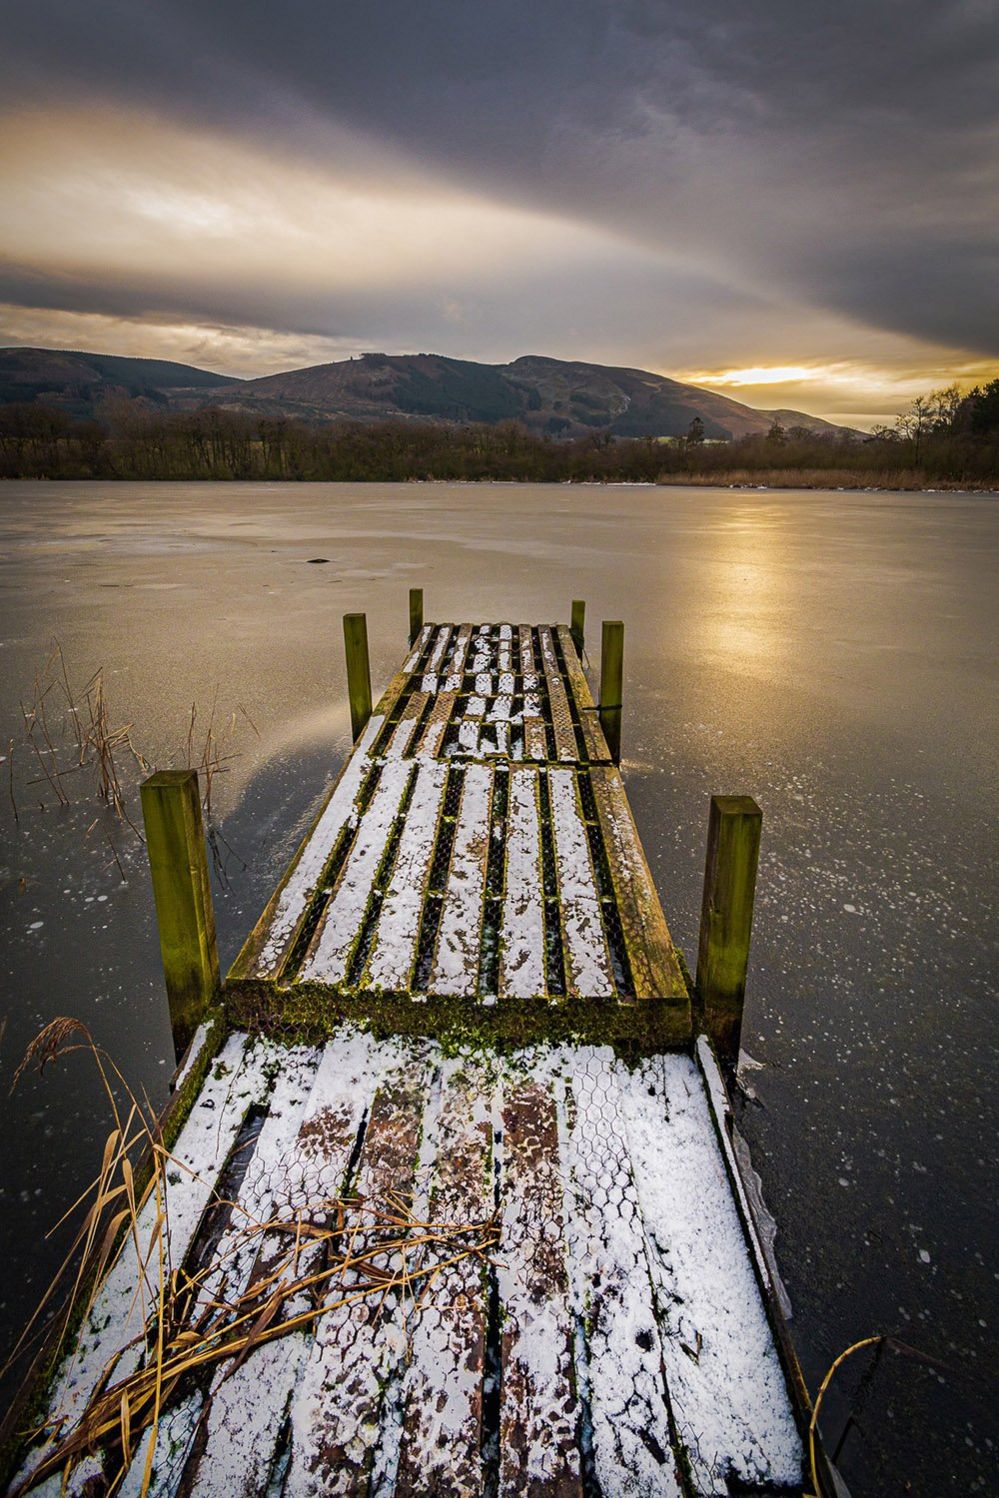 Snow on a jetty